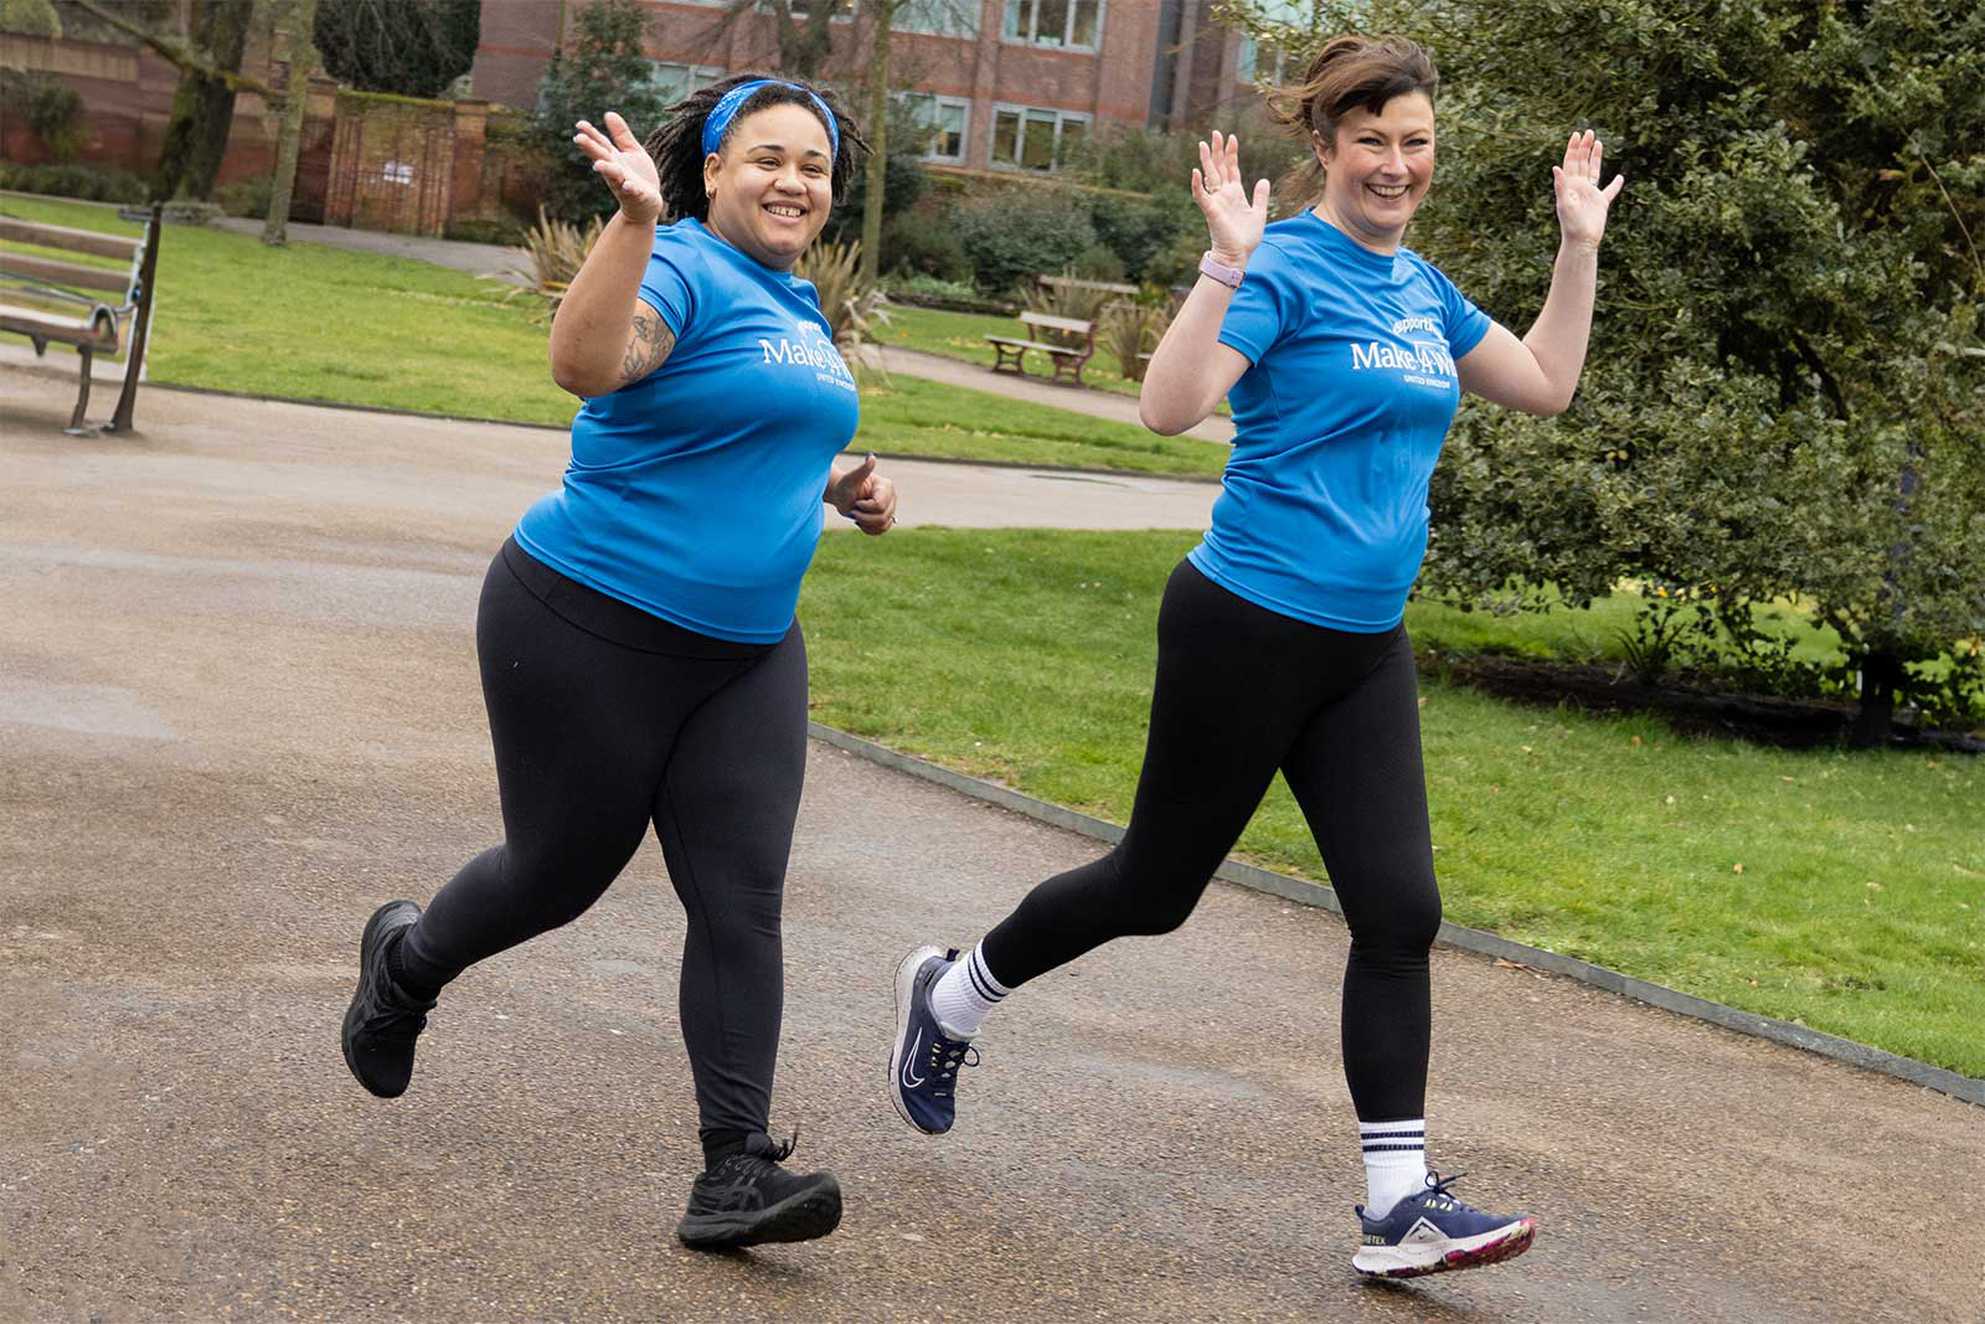 Charlotte and Alecia running through the park in their blue Make-A-Wish t-shirts.